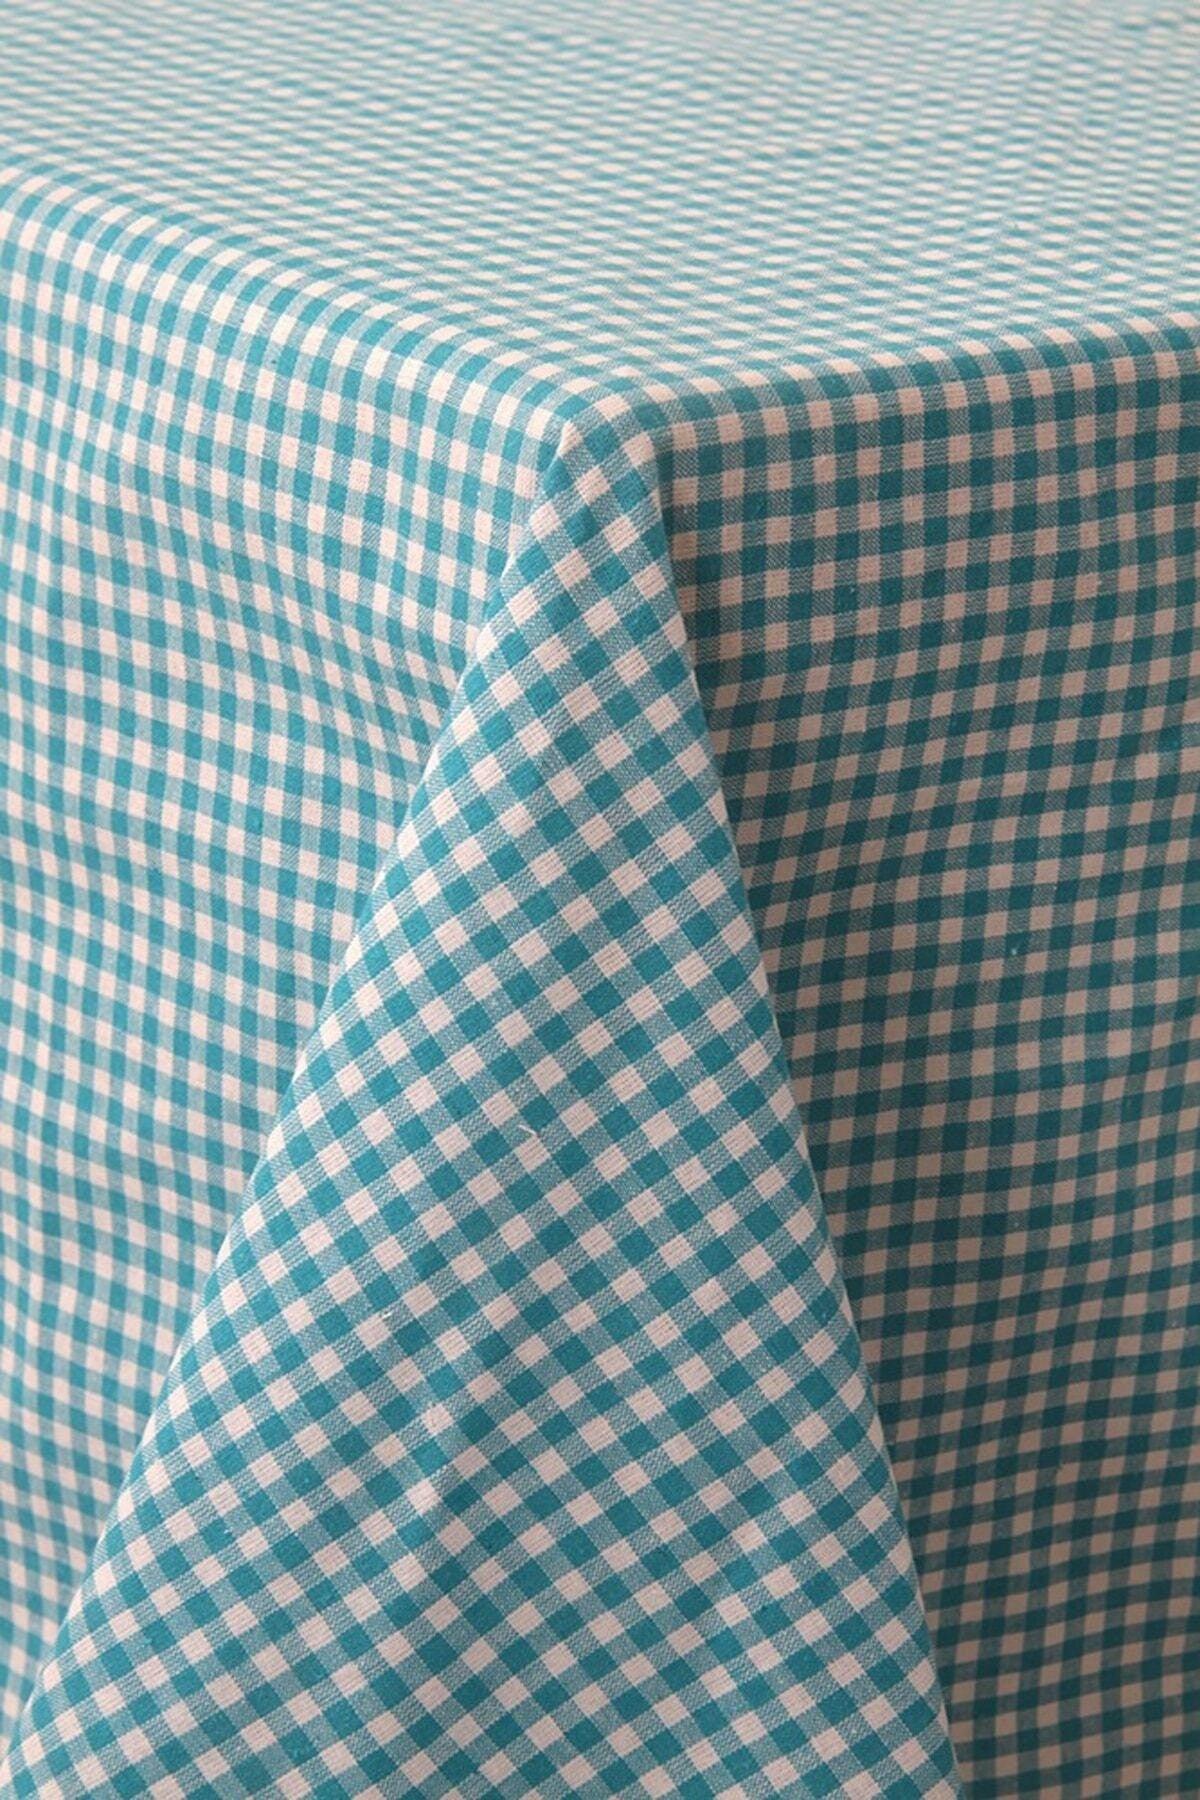 Piti Checkered Turquoise Table Cloth Cotton, Authentic Table Cover, Picnic Cover - Swordslife